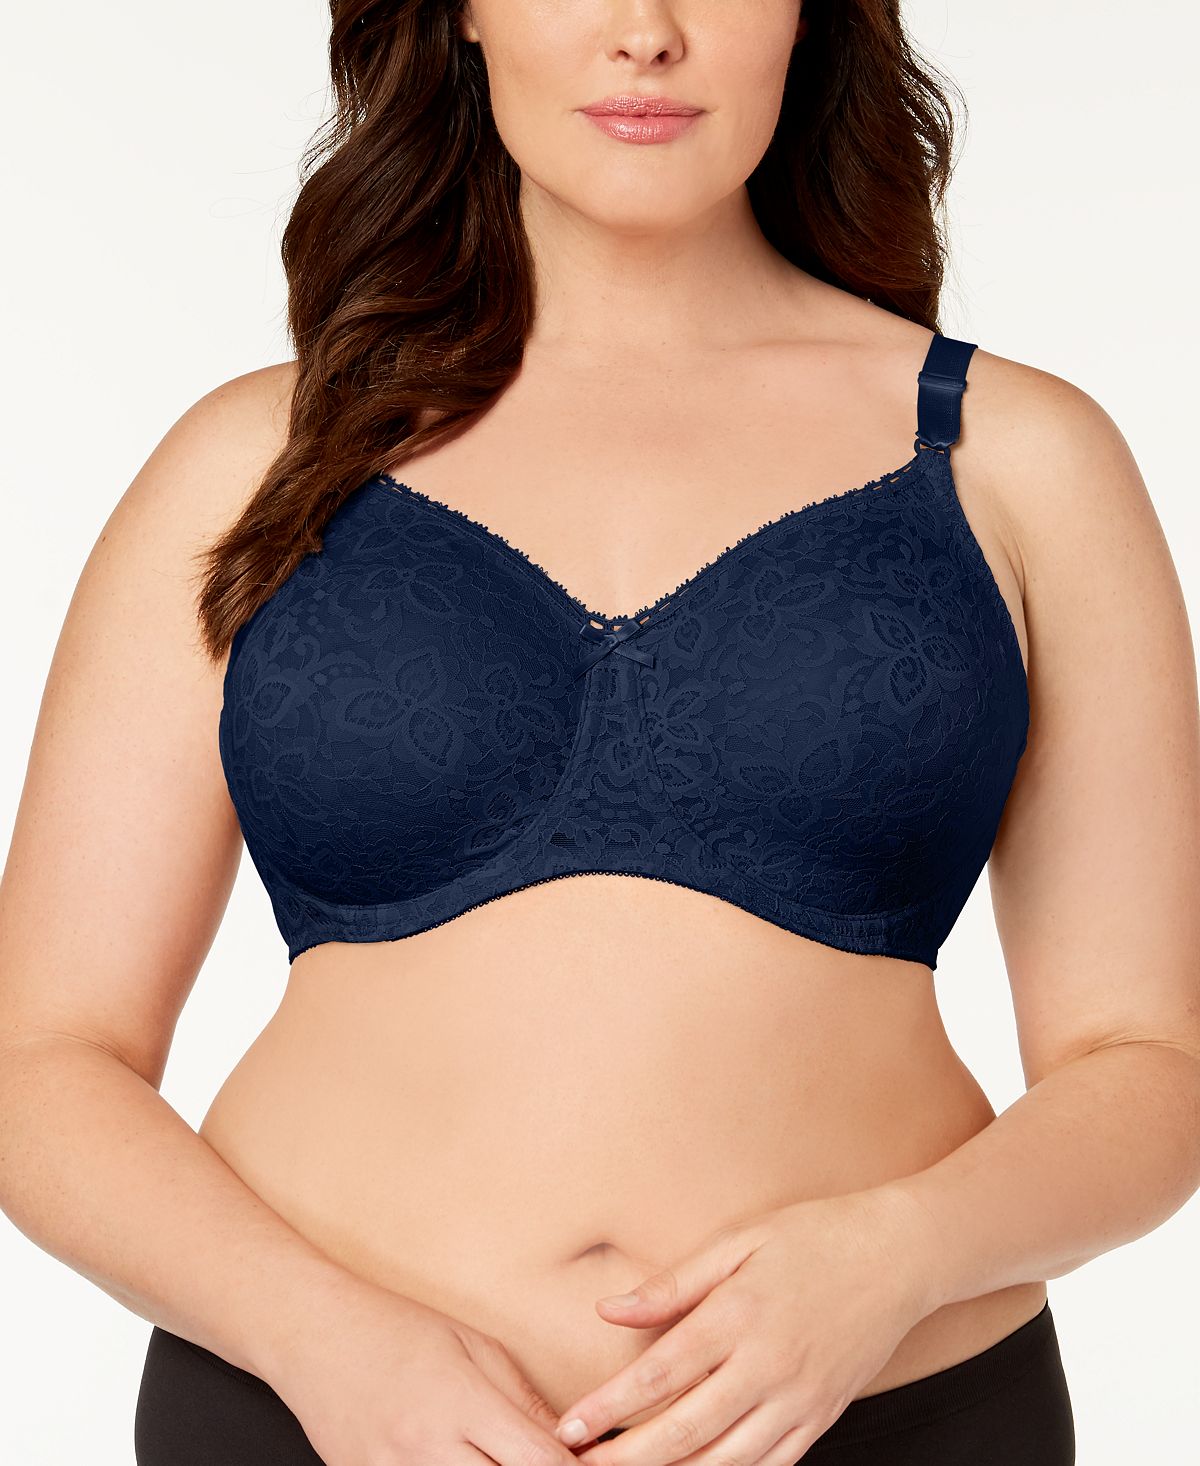 BALI Stretch Lace Navy Underwire Smoothing Shaping Support Soft